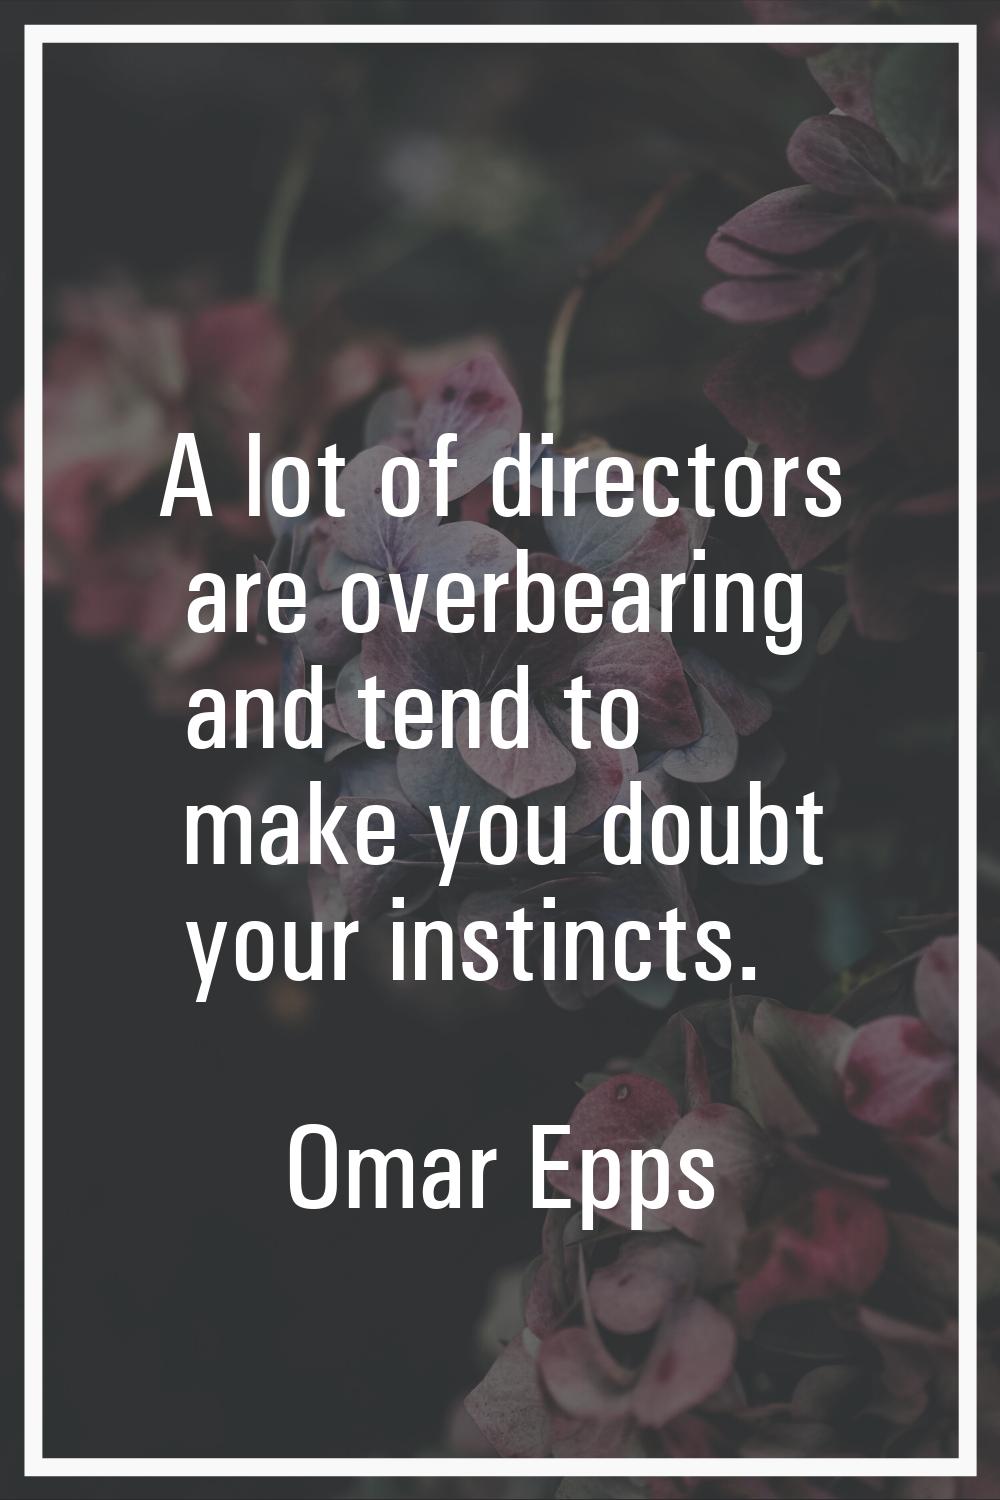 A lot of directors are overbearing and tend to make you doubt your instincts.